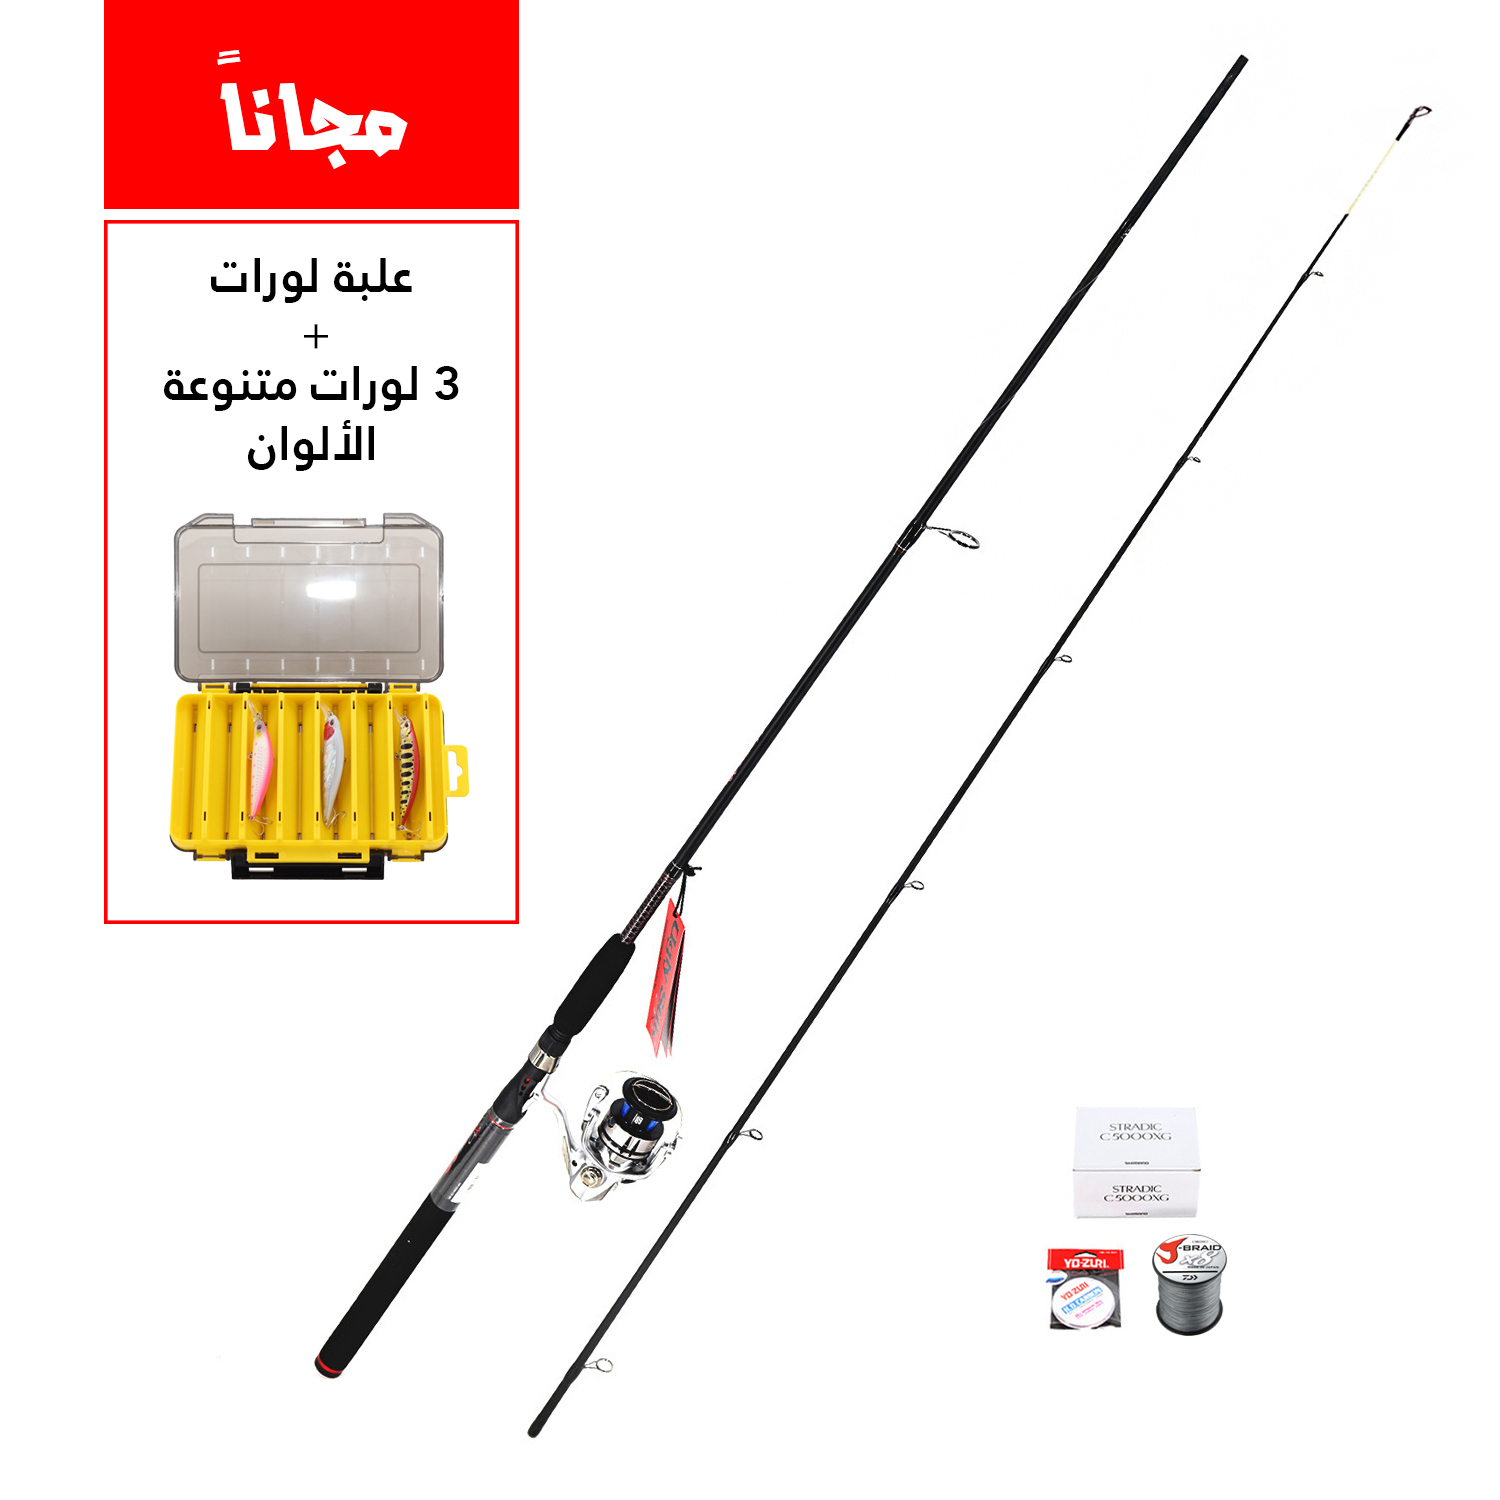 Shore Fishing (Pilot 4.2m and Penn VI 5500 including braid and mono line  with rigs and sinkers and snap swivels) Combo